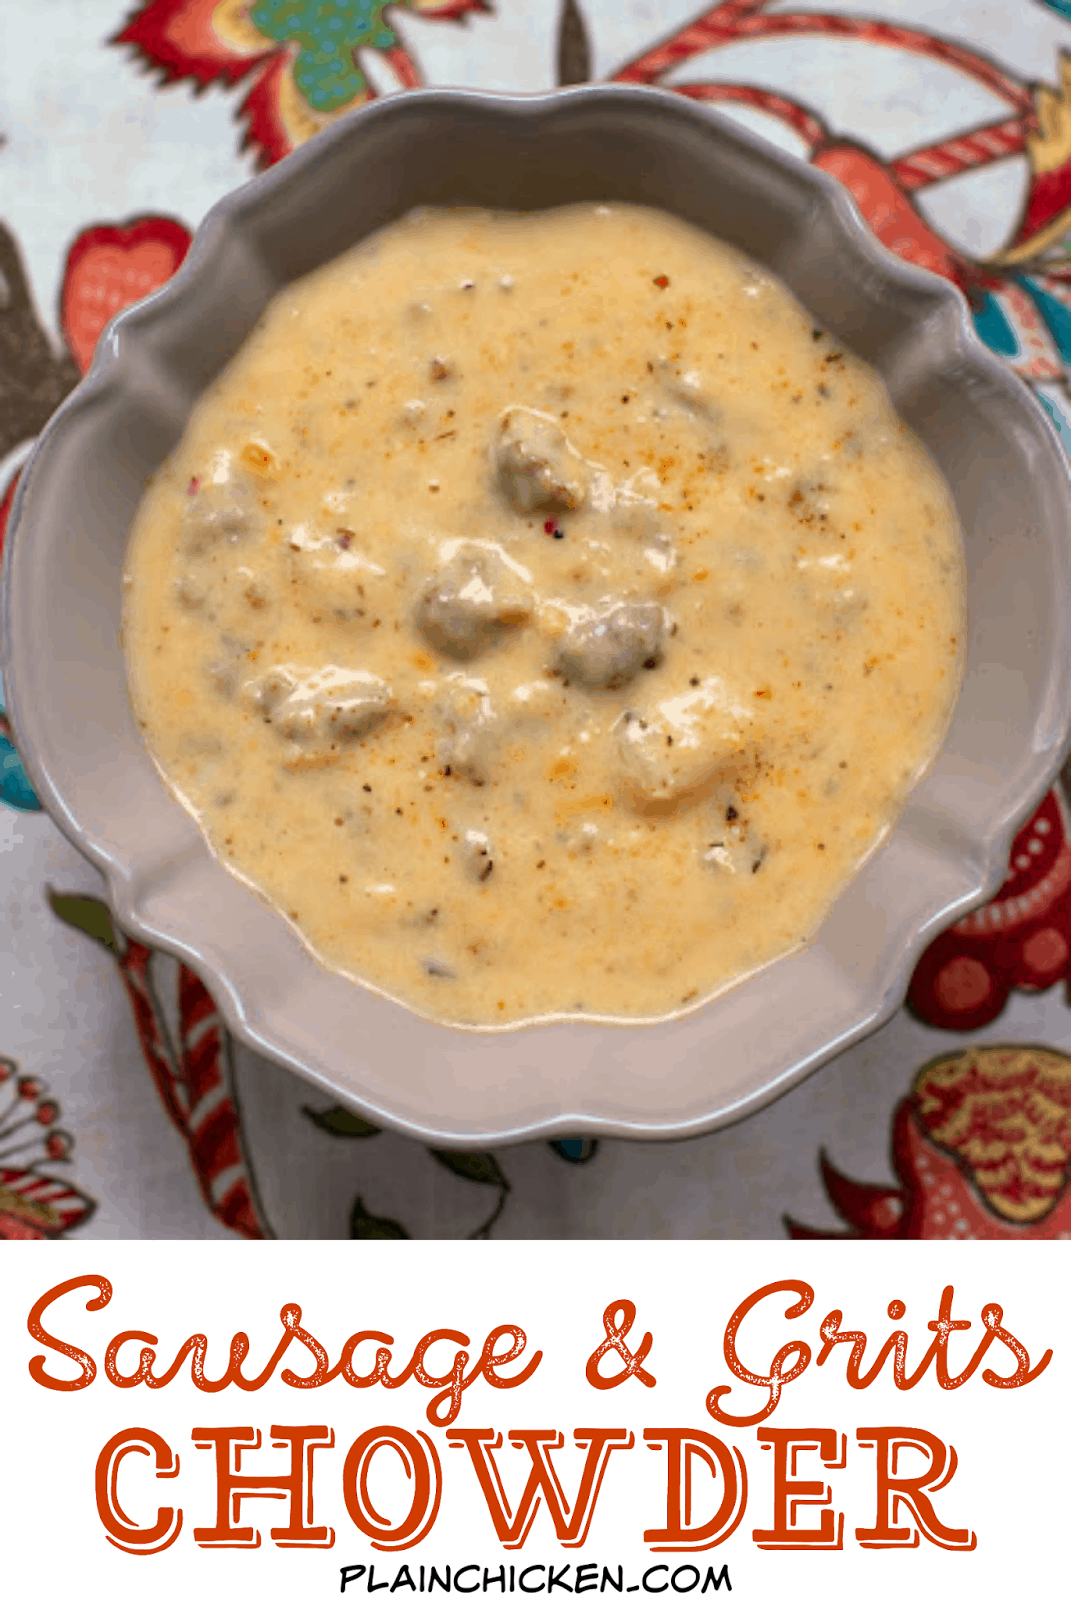 Sausage and Grits Chowder - sausage, potato soup, creamed corn, milk, cajun seasoning, grits and water. Ready in about 15 minutes! SO delicious!